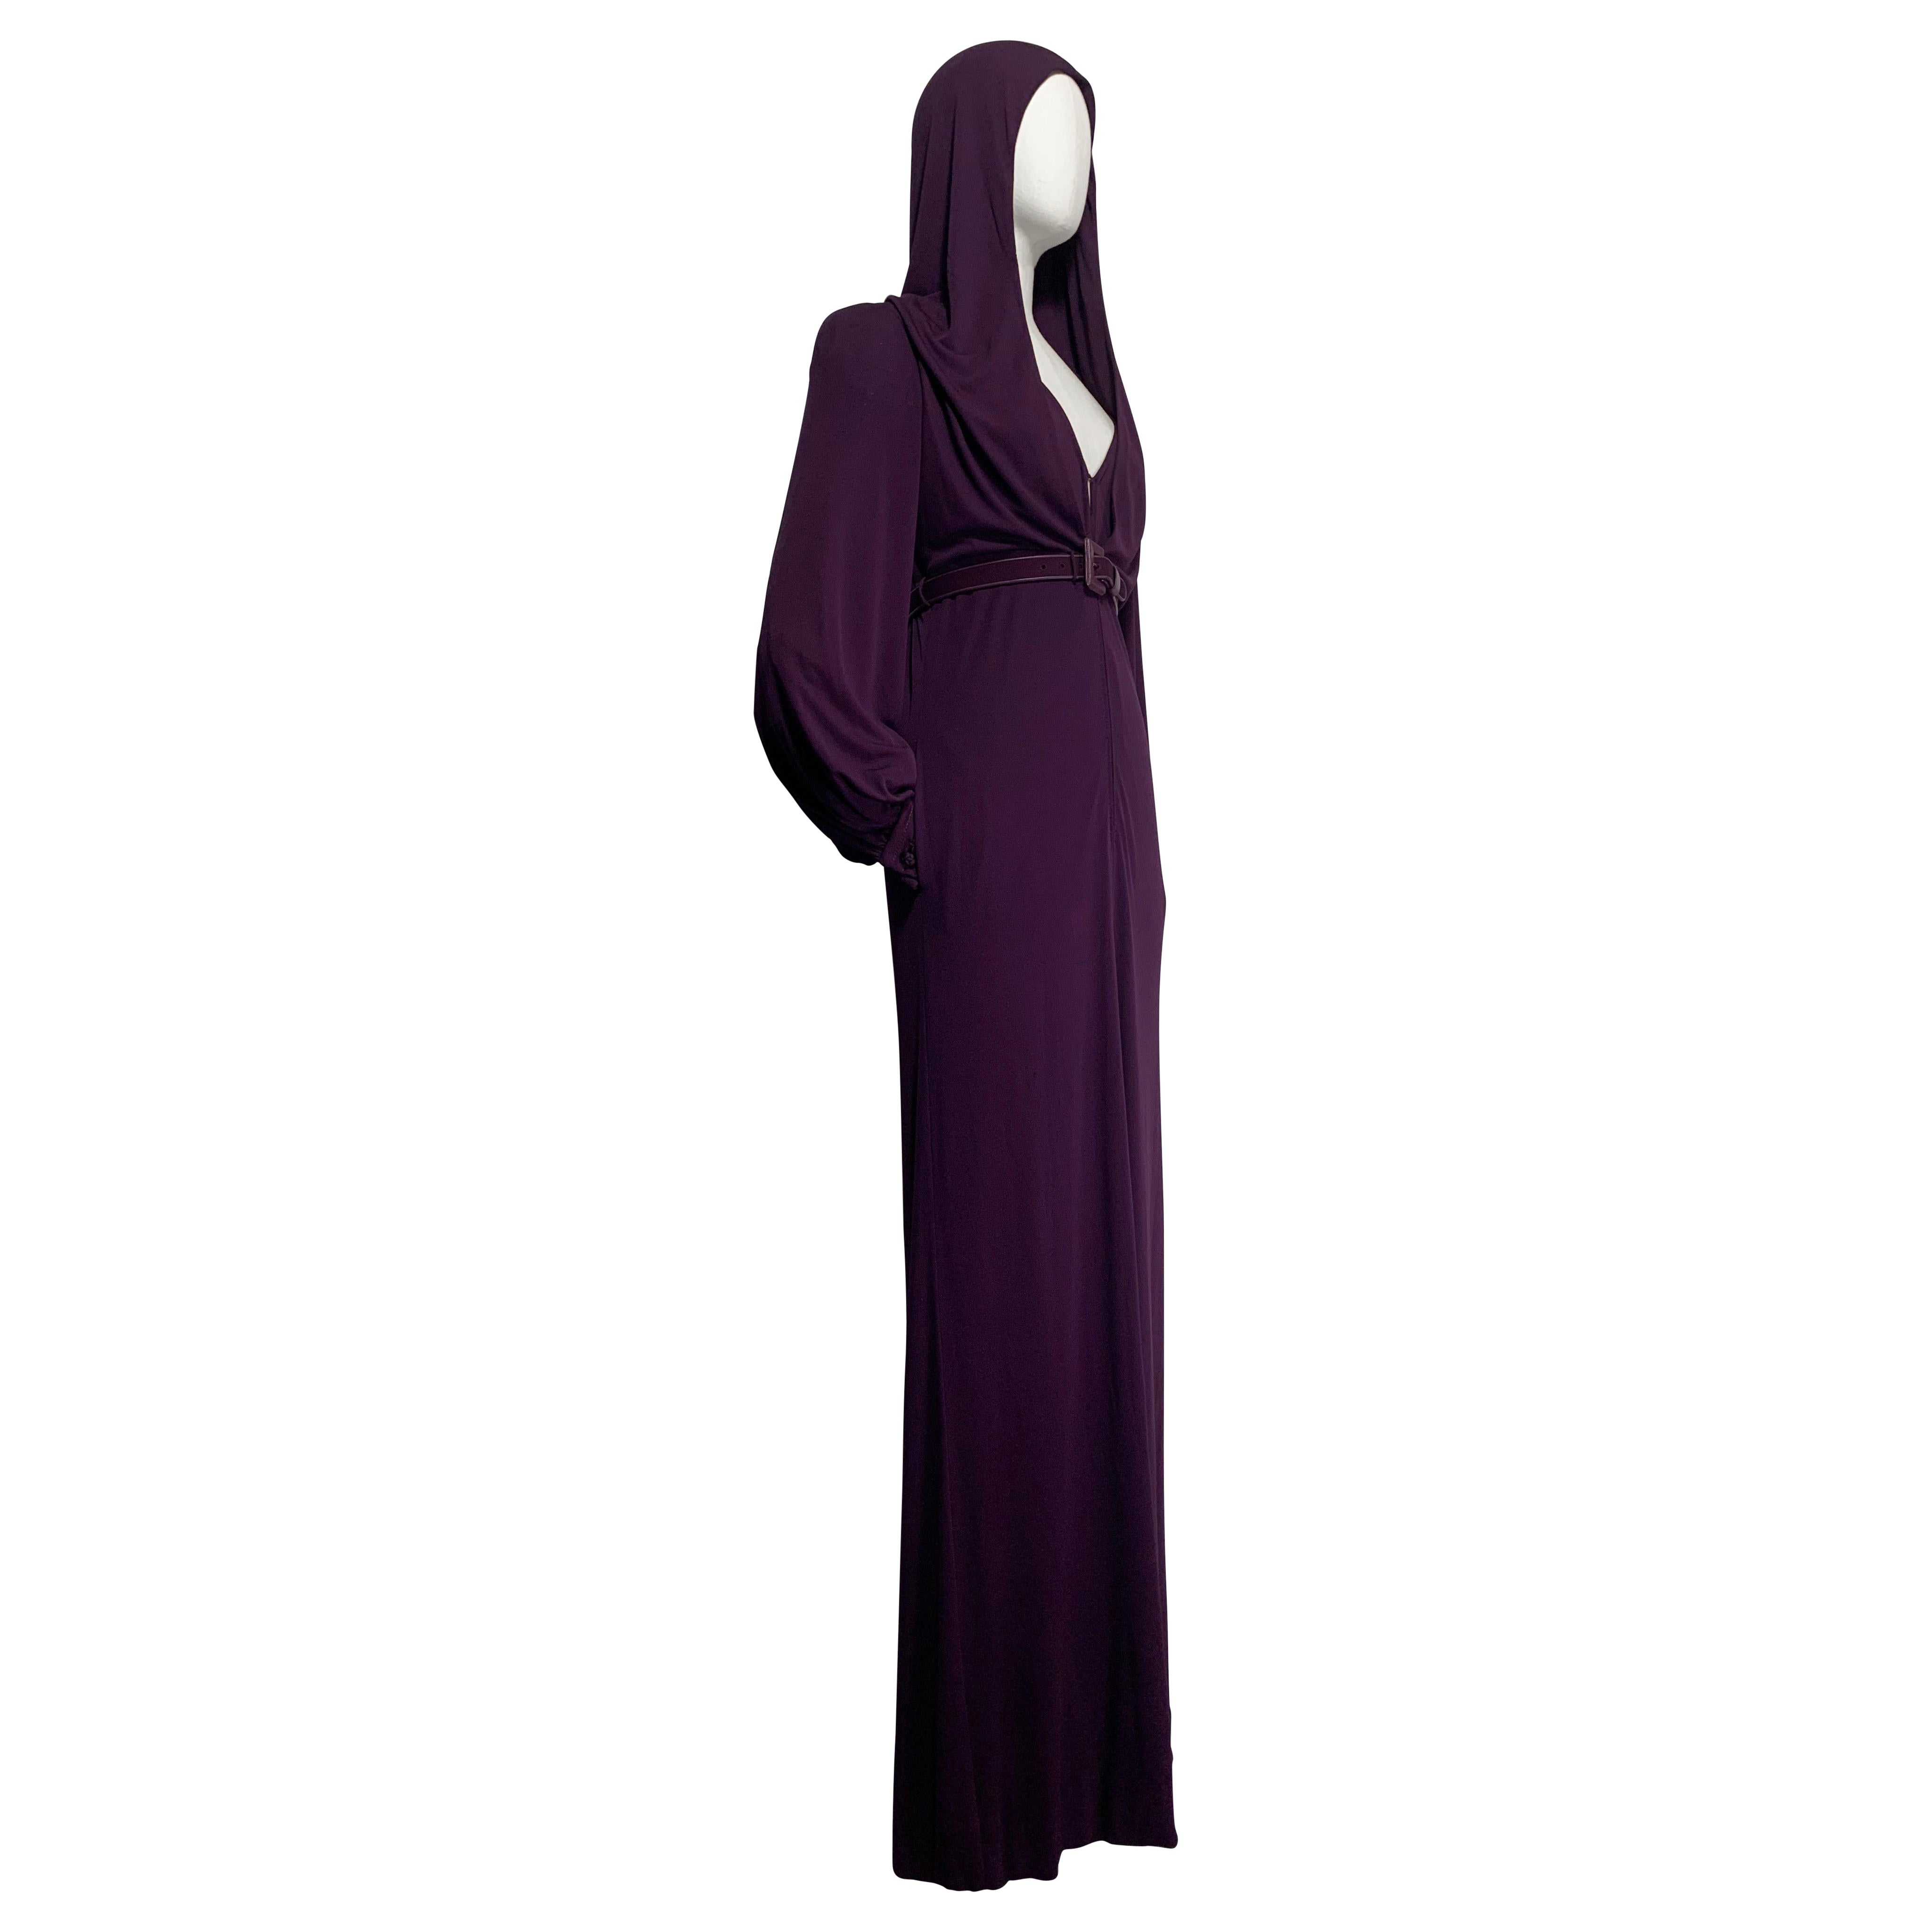 1975 James Galanos Dramatic Aubergine Jersey Maxi Gown w Fabulous Draped Hood For Sale